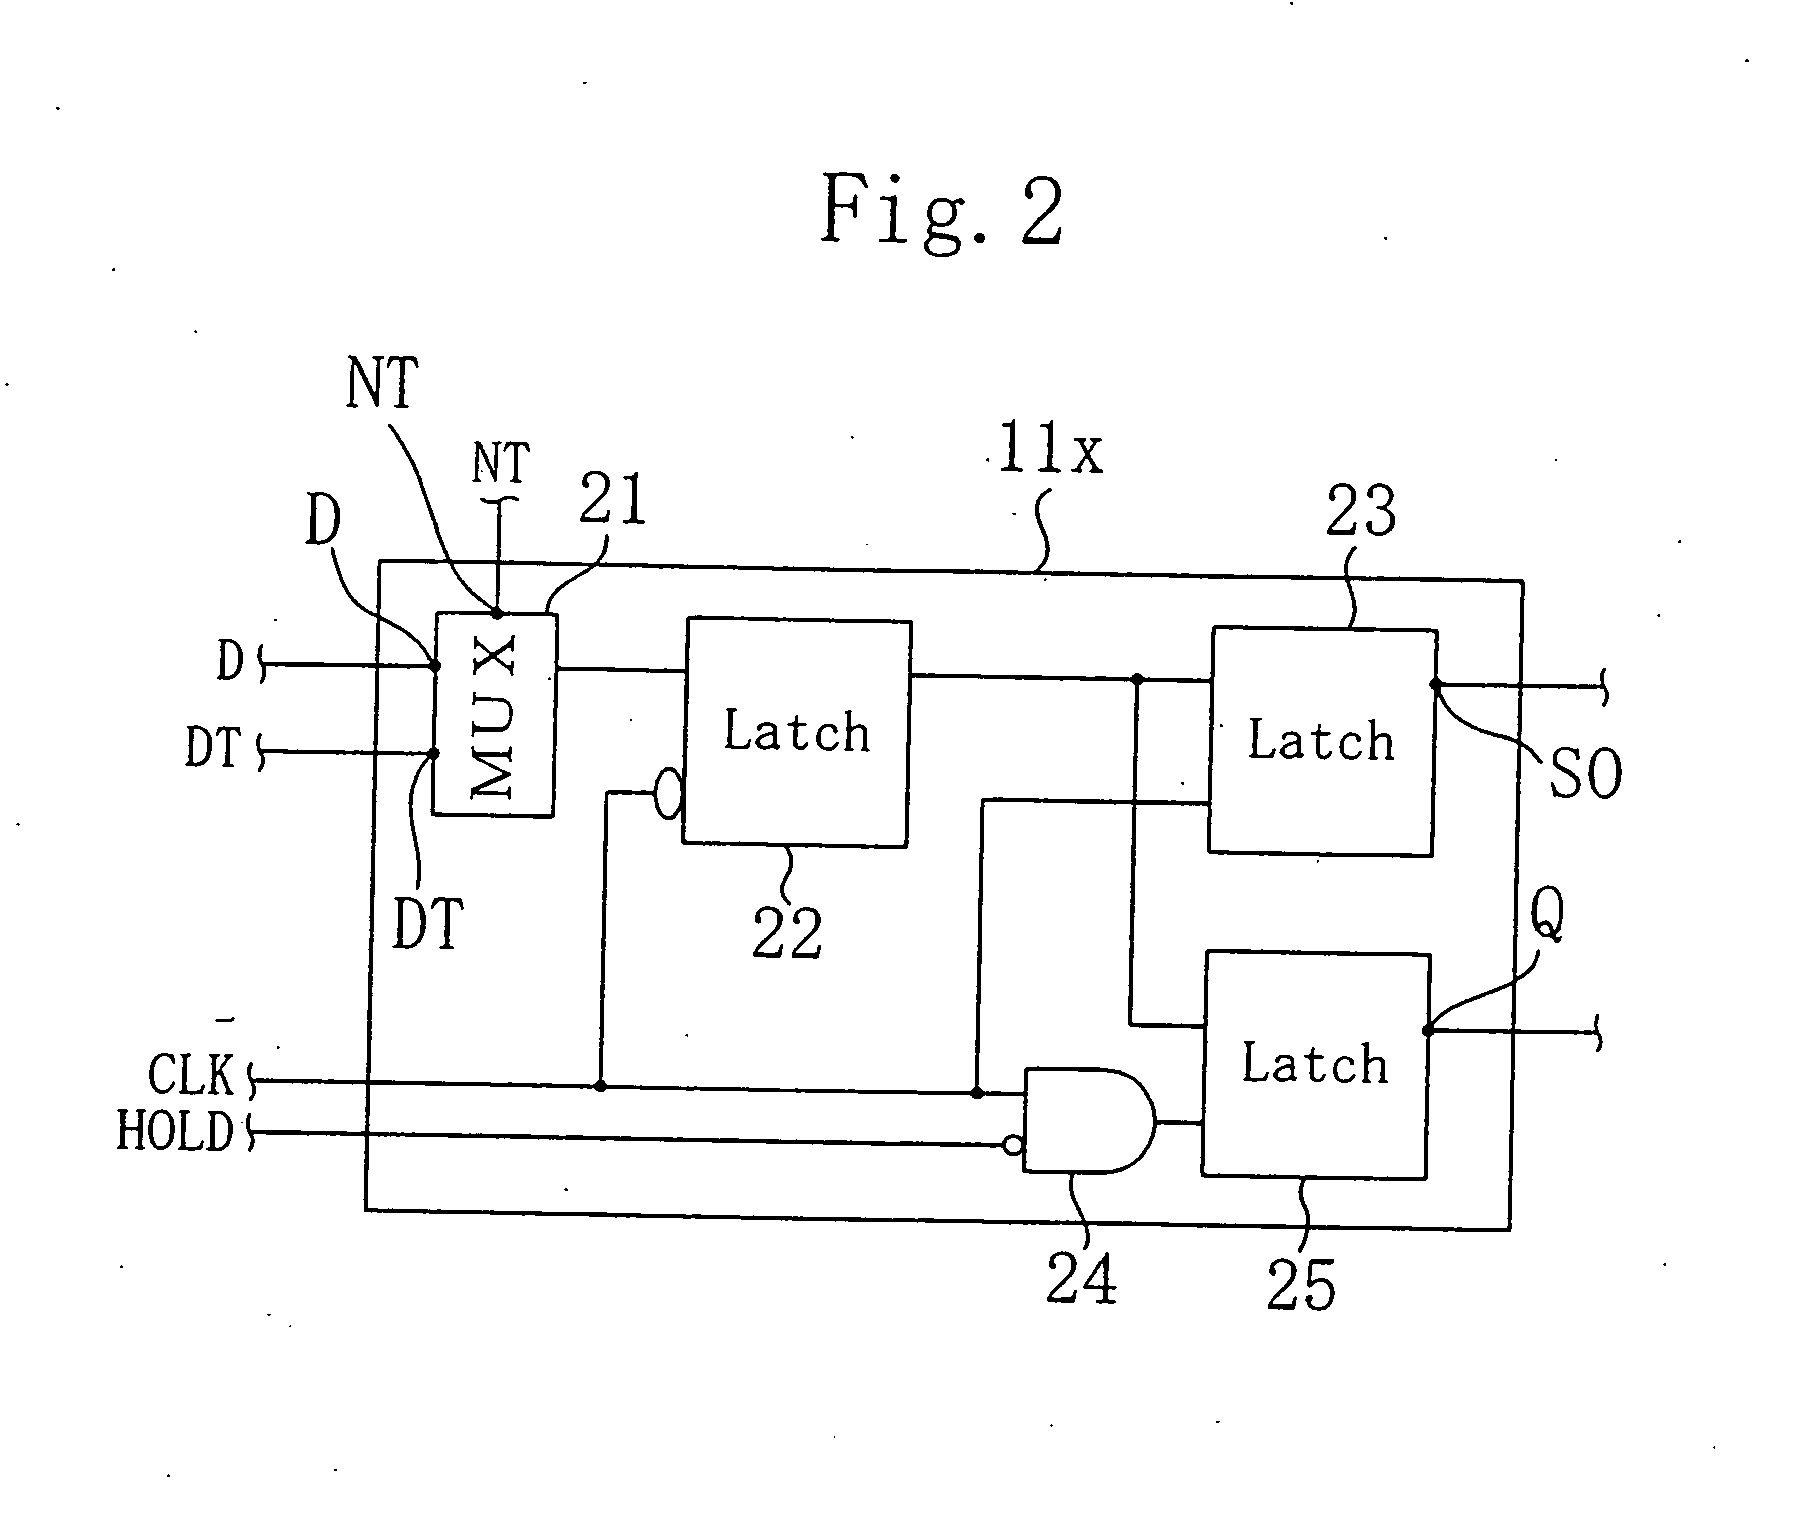 Semiconductor integrated circuit device, method of testing the same, database for design of the same and method of designing the same